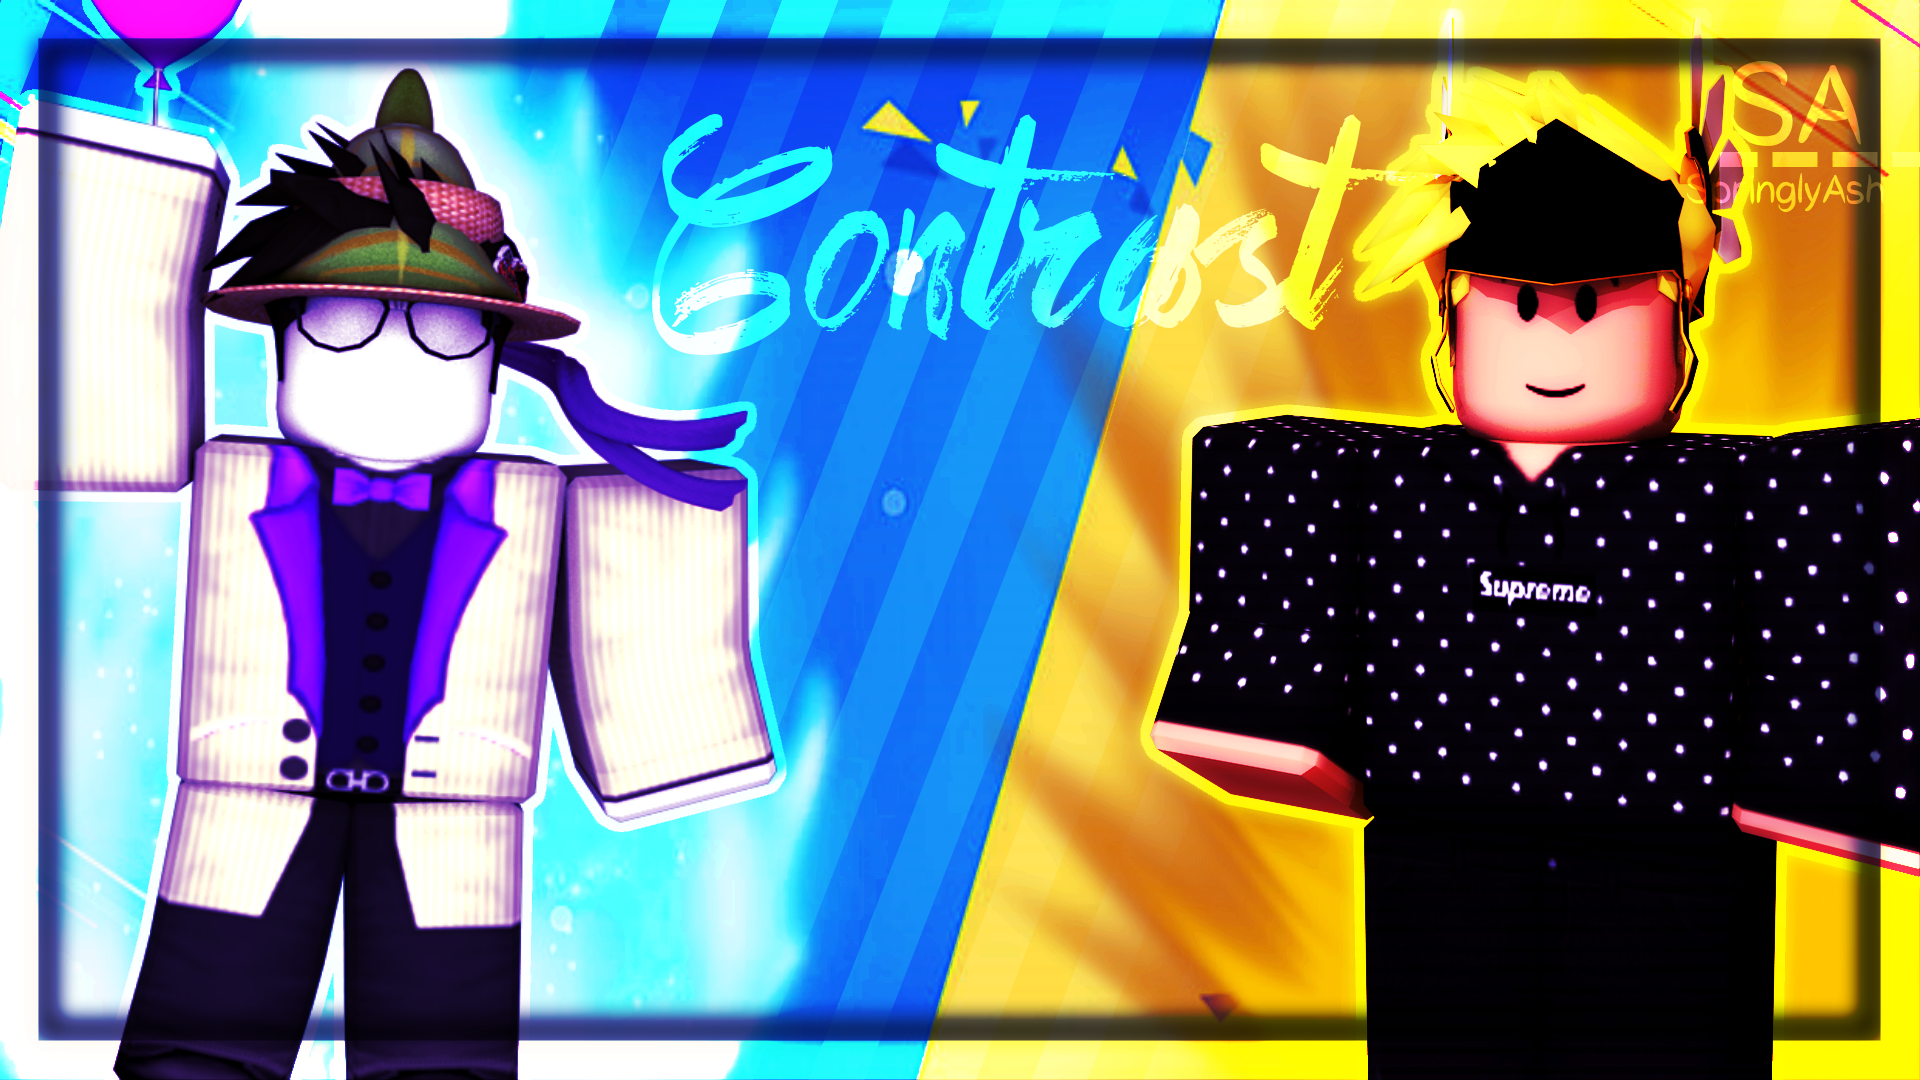 Roblox Gfx Contrast By Springlyash On Deviantart - roblox gfx developer quenty by springlyash on deviantart